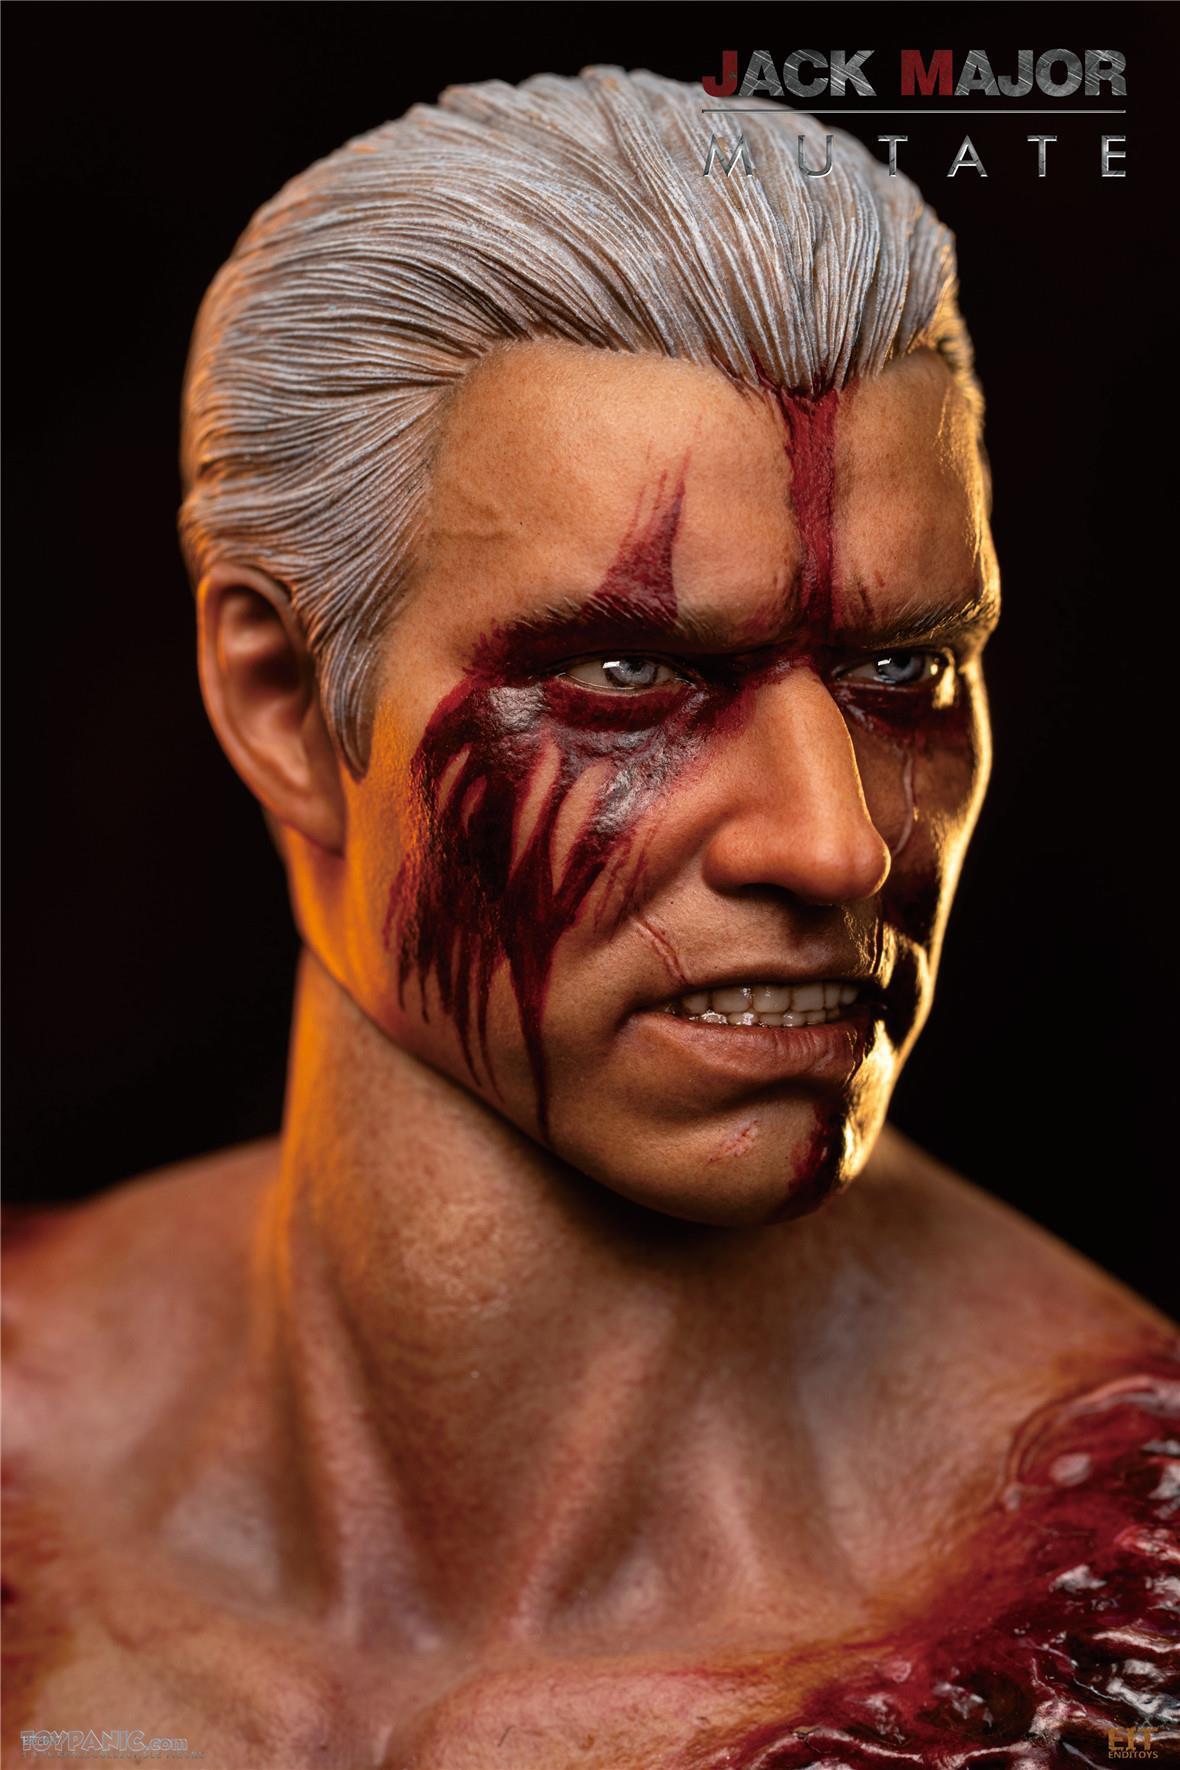 mutate - NEW PRODUCT:  1/6 Jack Major Mutate from End I Toys  2732024105952AM_6151206